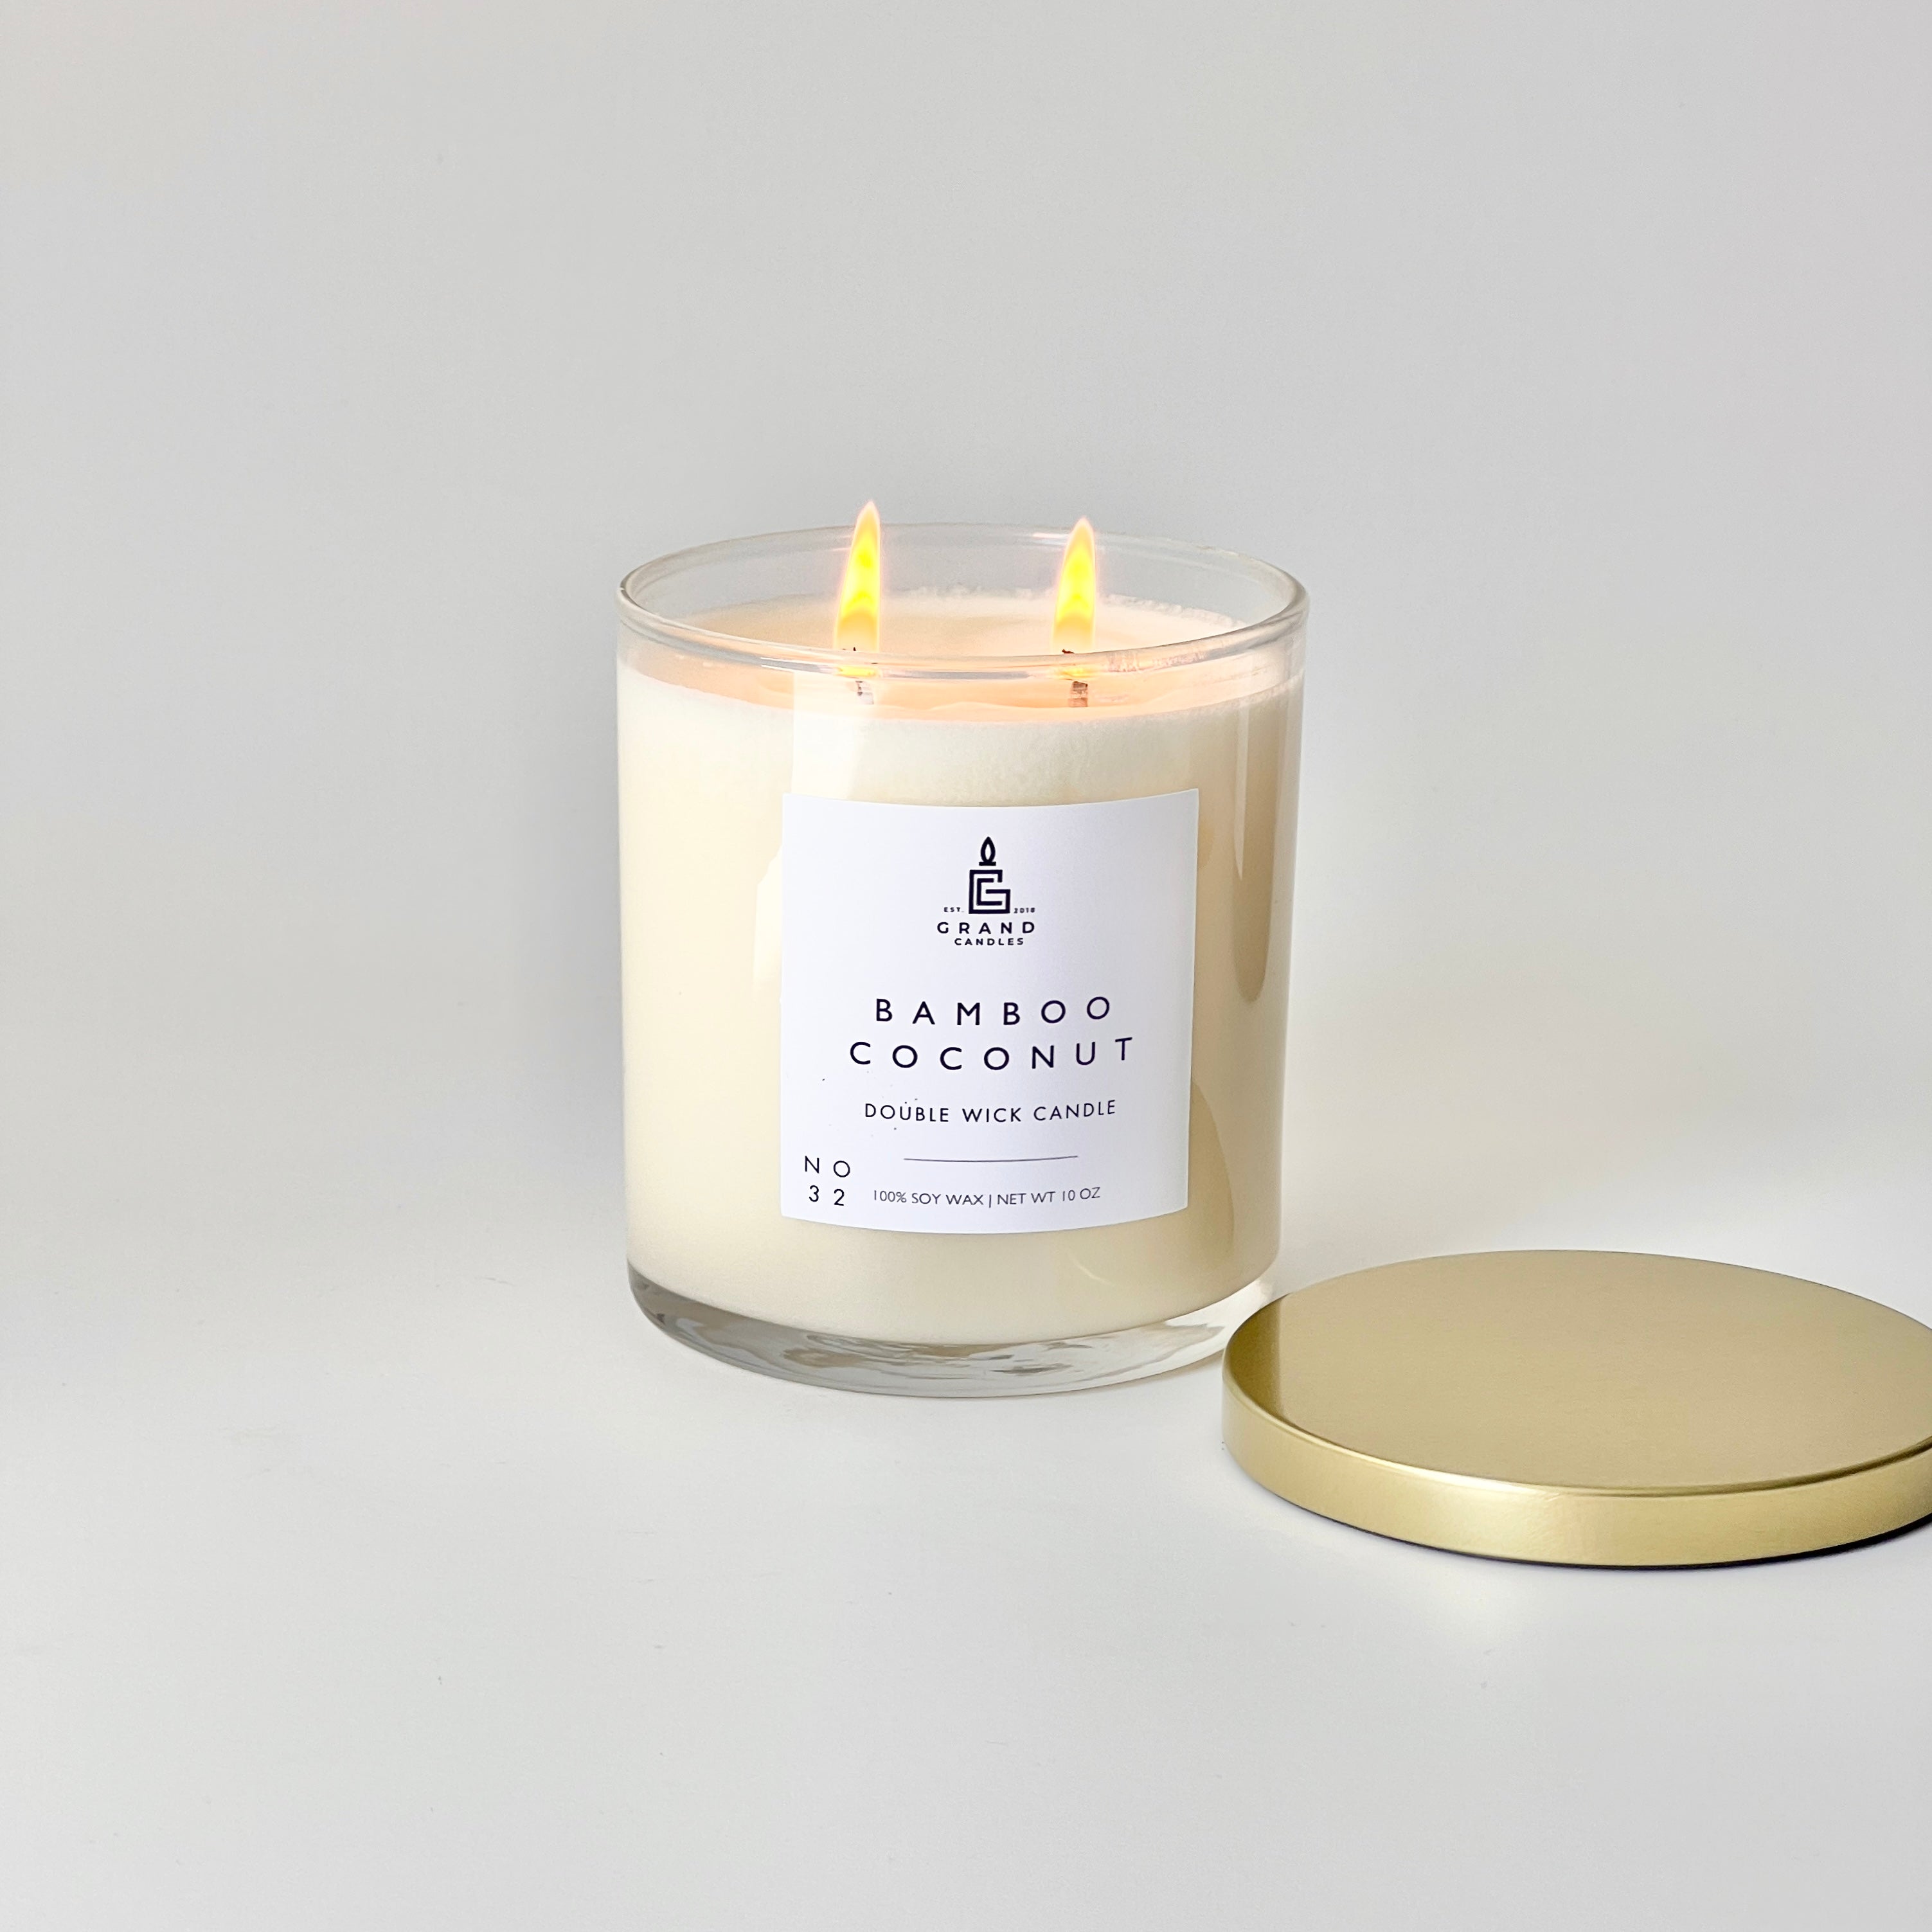 Bamboo Coconut Candle